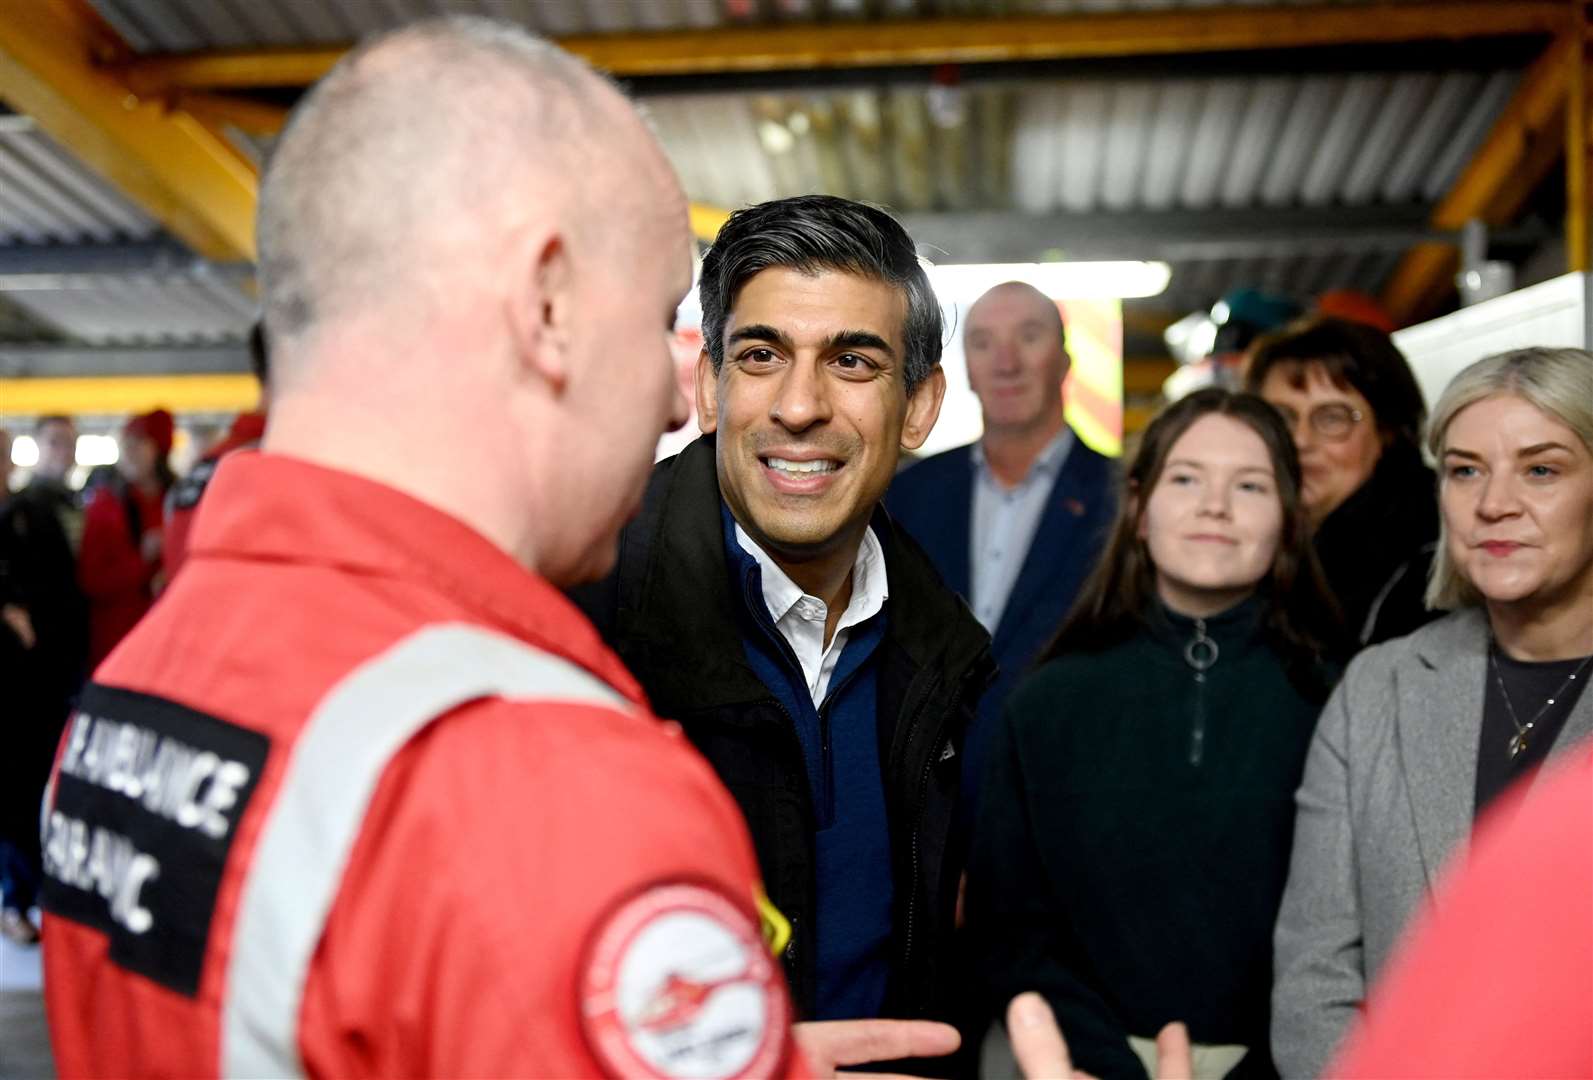 Prime Minister Rishi Sunak during a visit to Air Ambulance Northern Ireland at its headquarters in Lisburn (Carrie Davenport/PA)